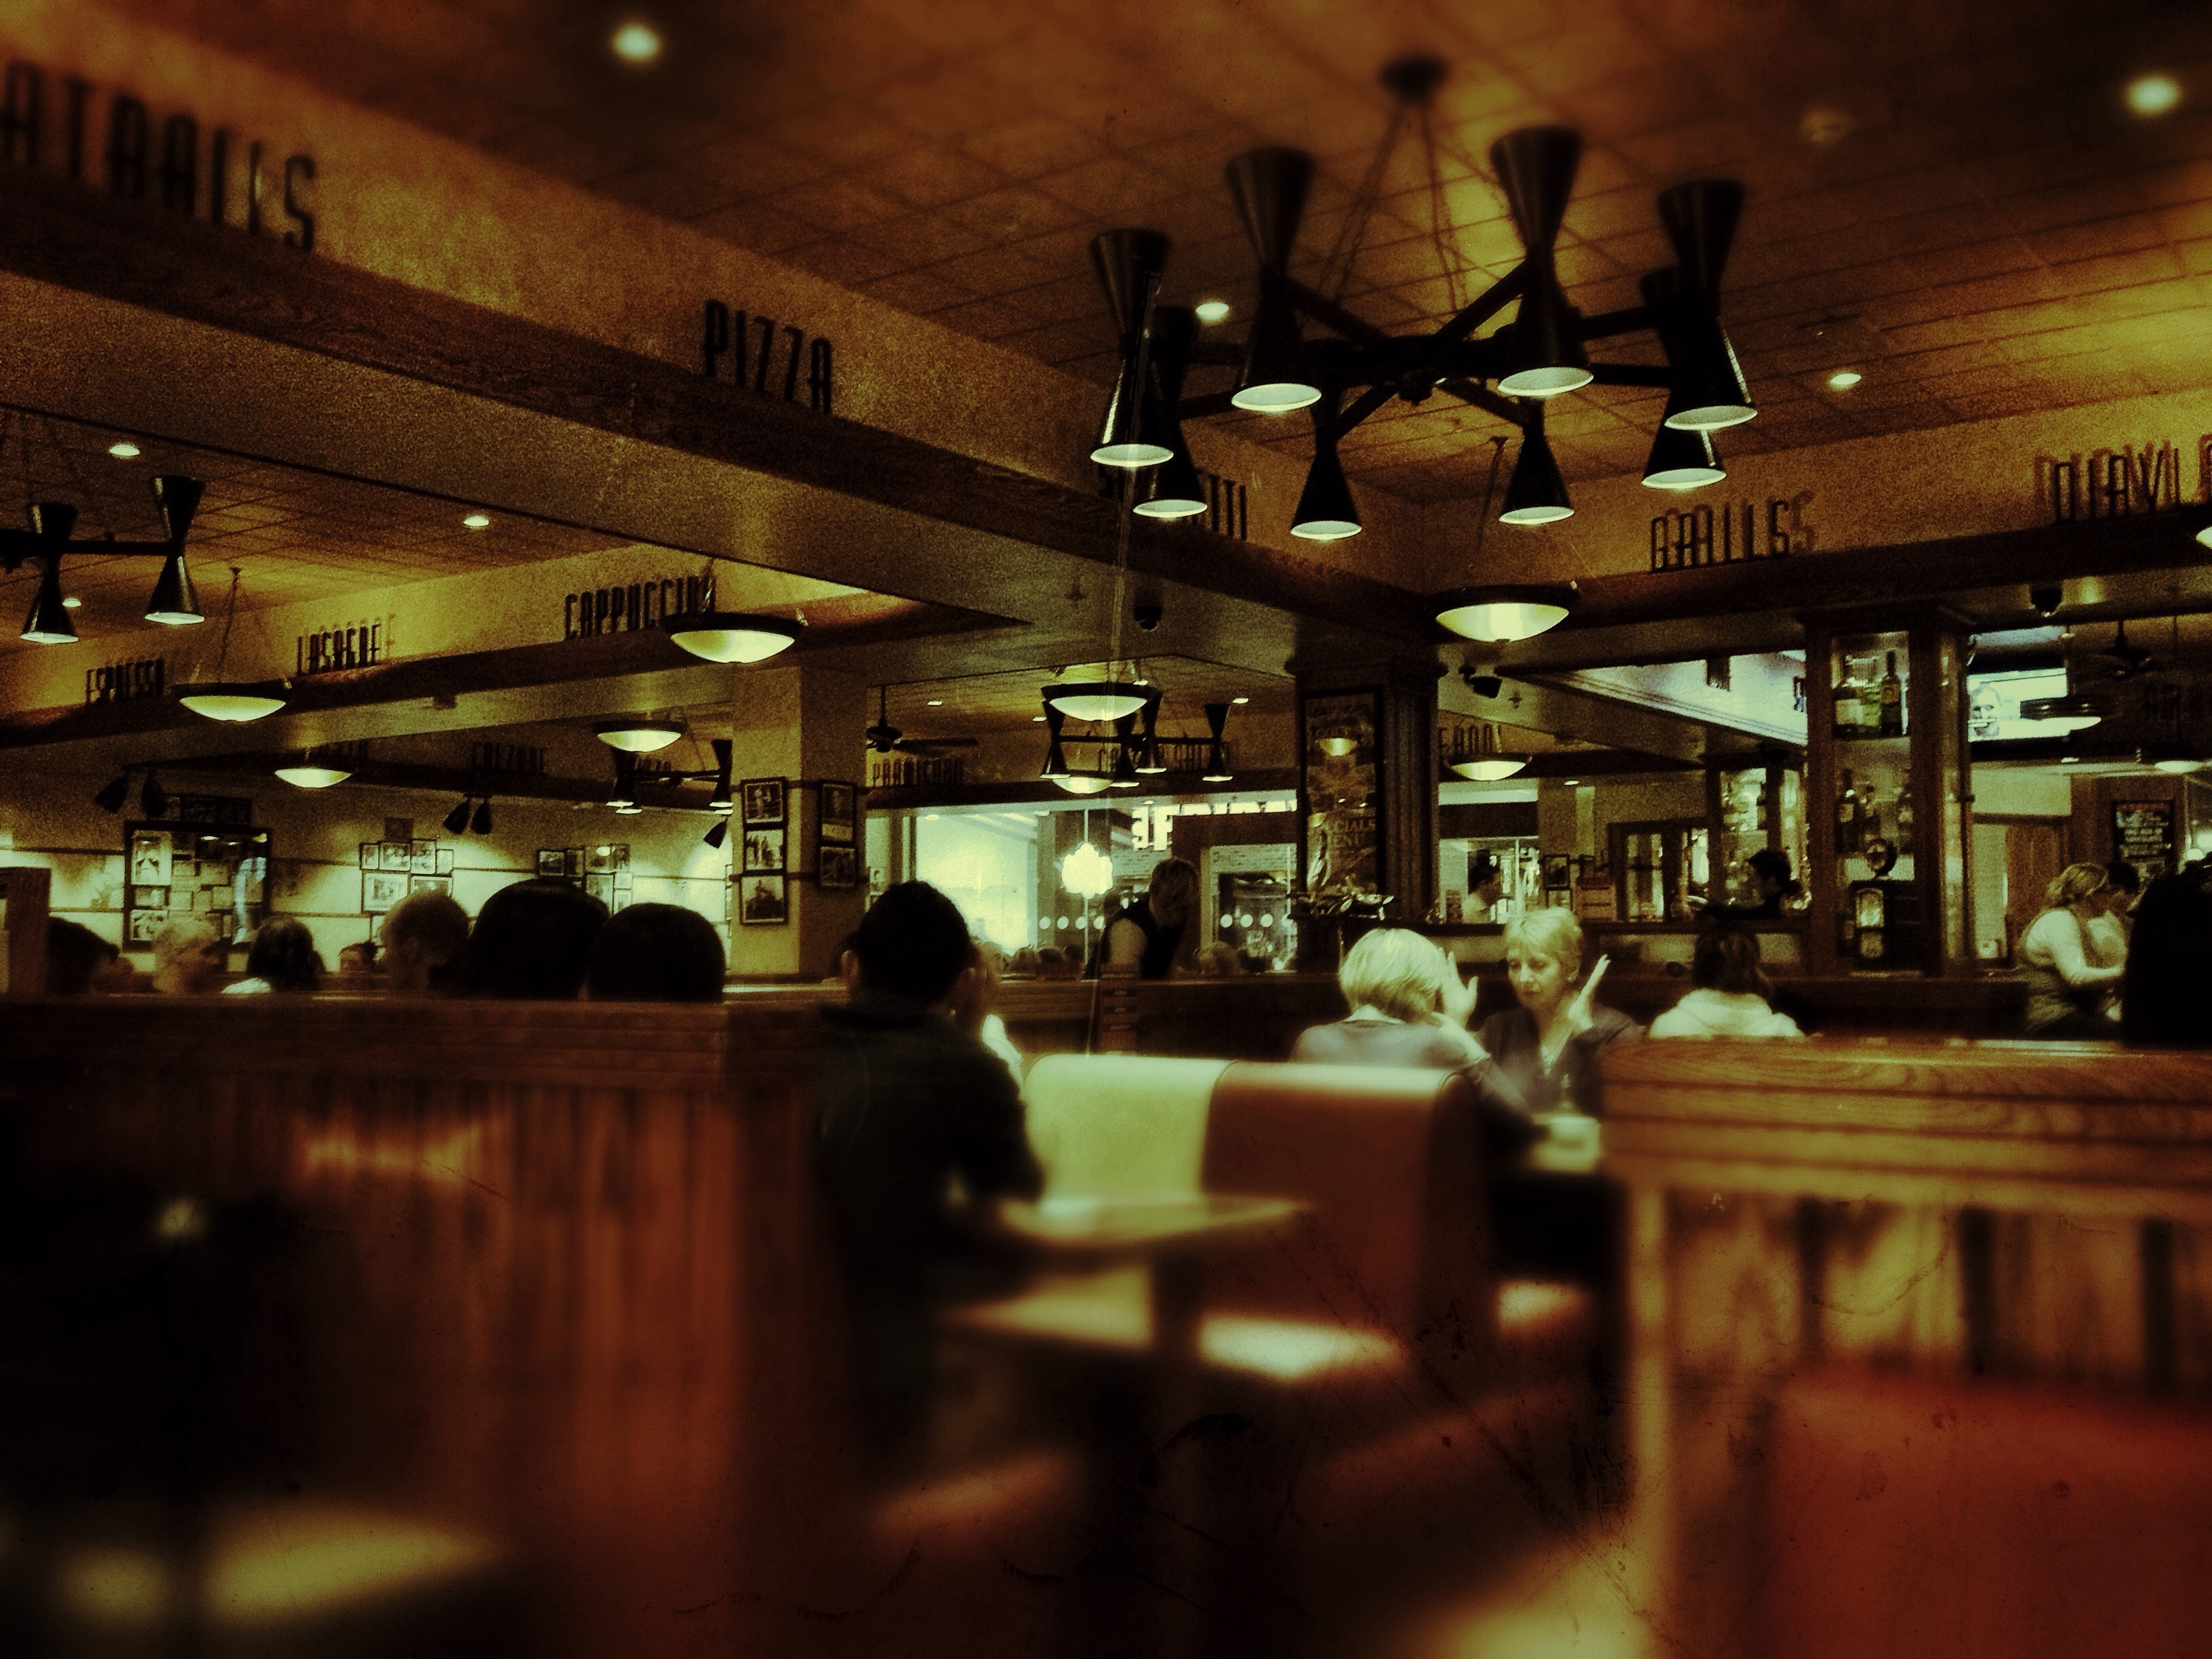 Photograph: Diner